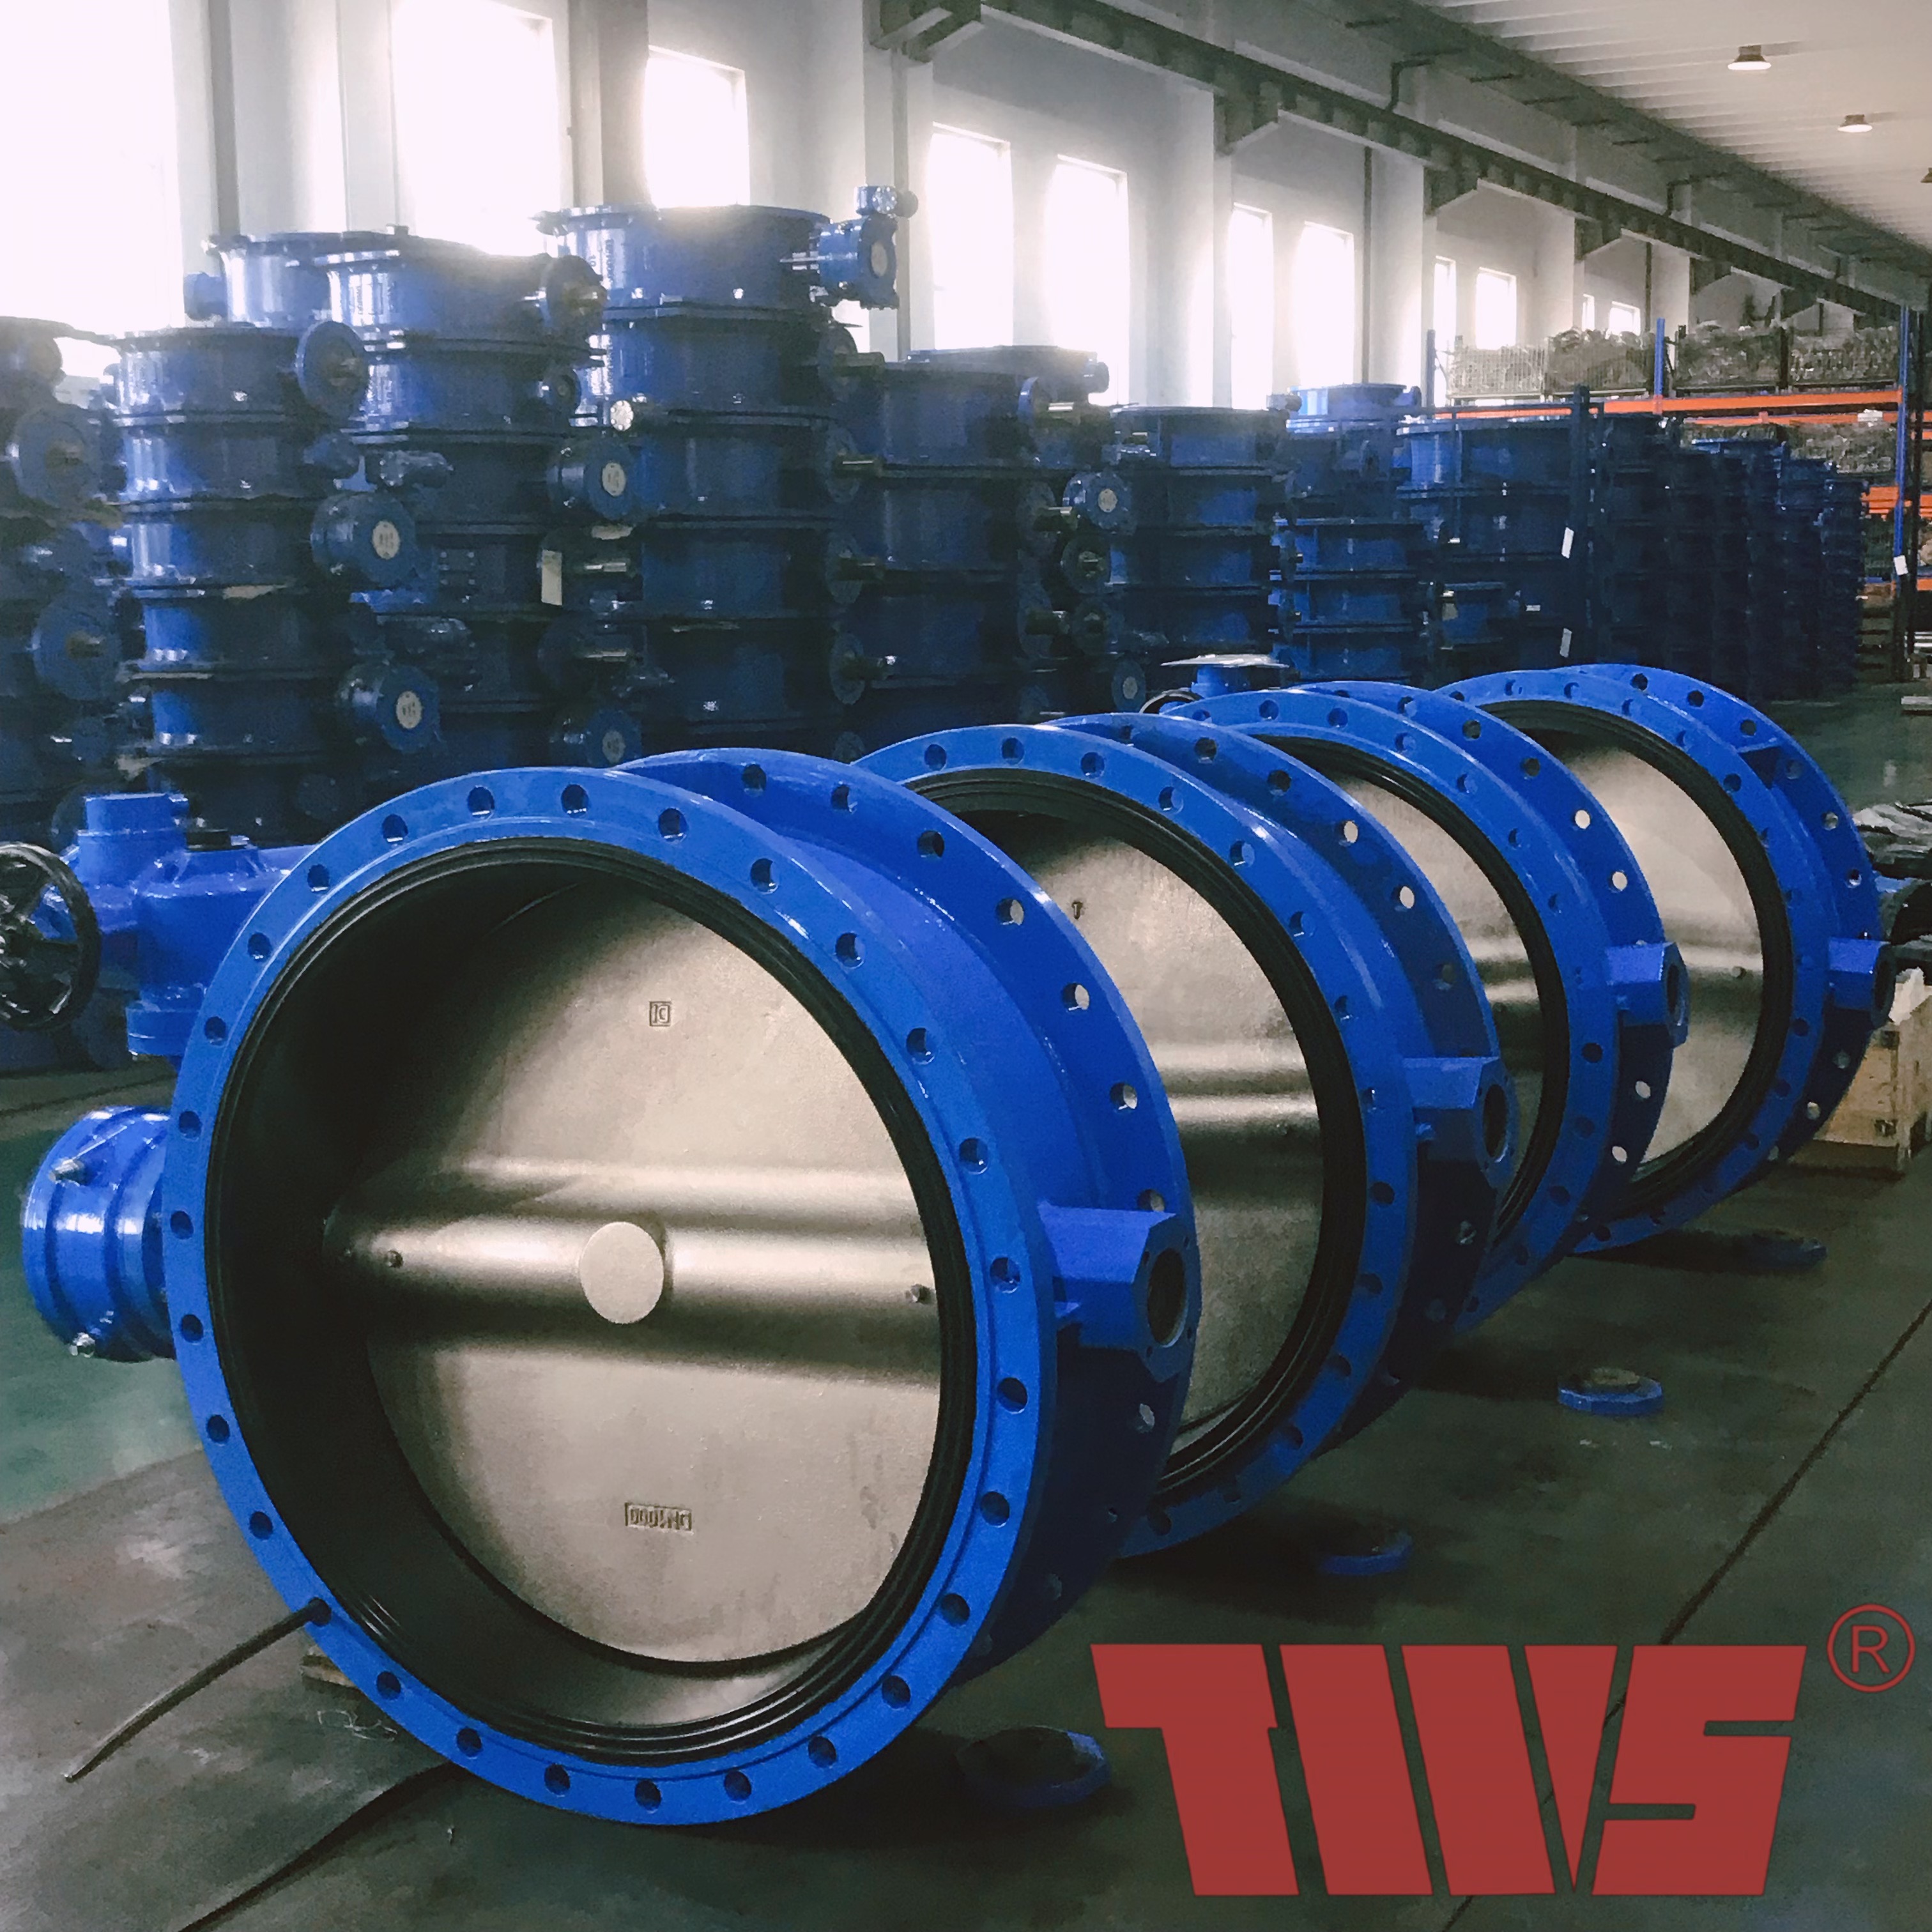 TWS Butterfly valves have a wide range of uses